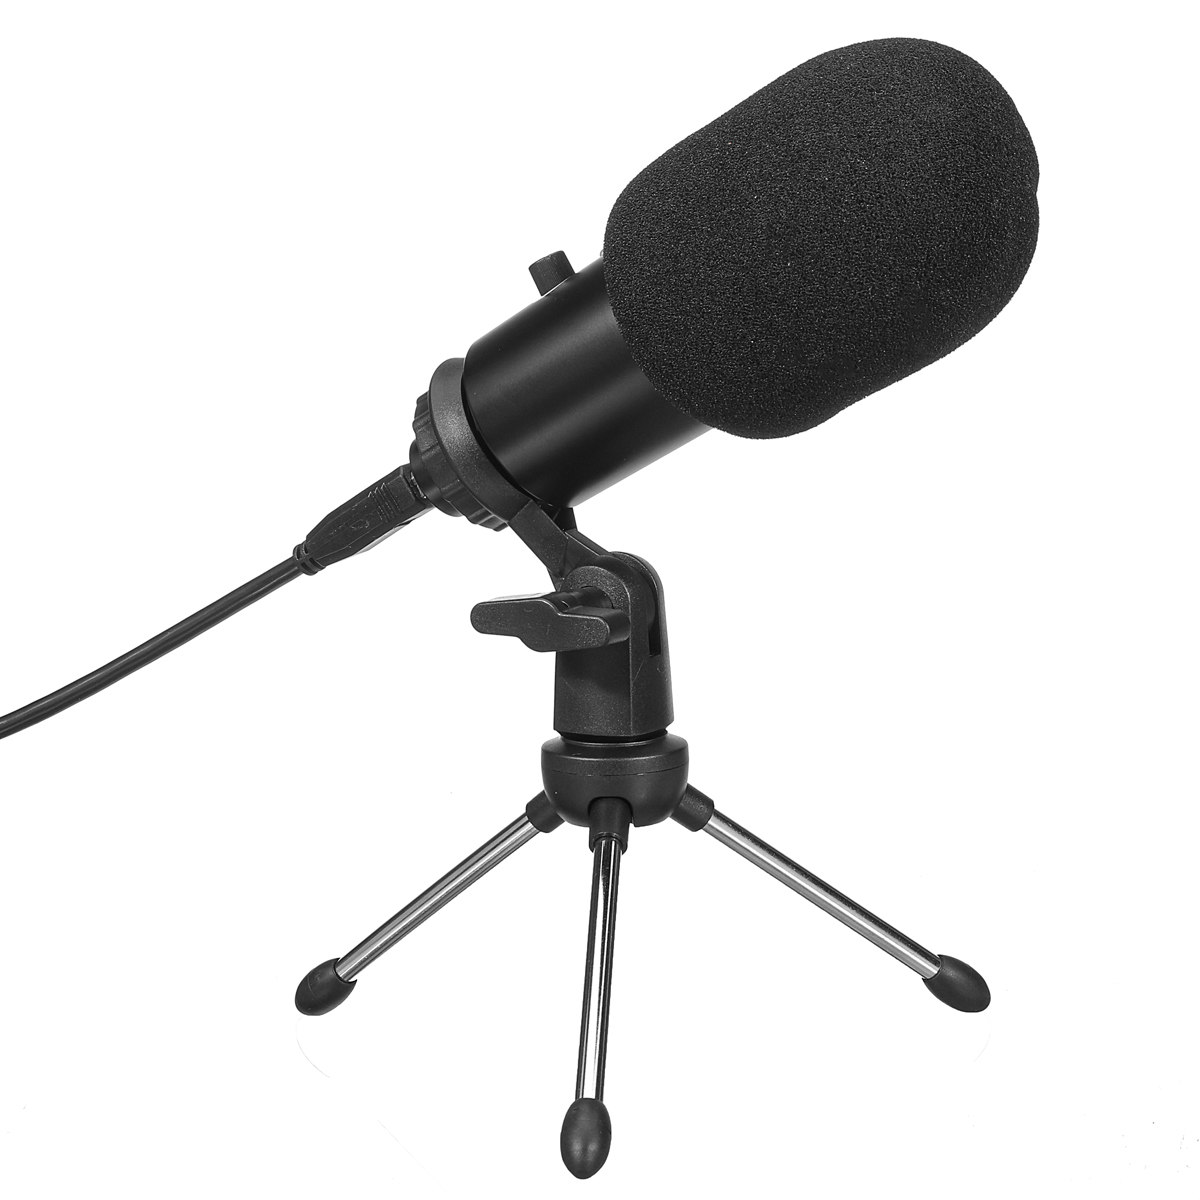 Wired-USB-Microphone-with-Tripod-for-Computer-Windows-for-Mac-PC-Live-Broadcast-Video-Conferencing-A-1866200-3